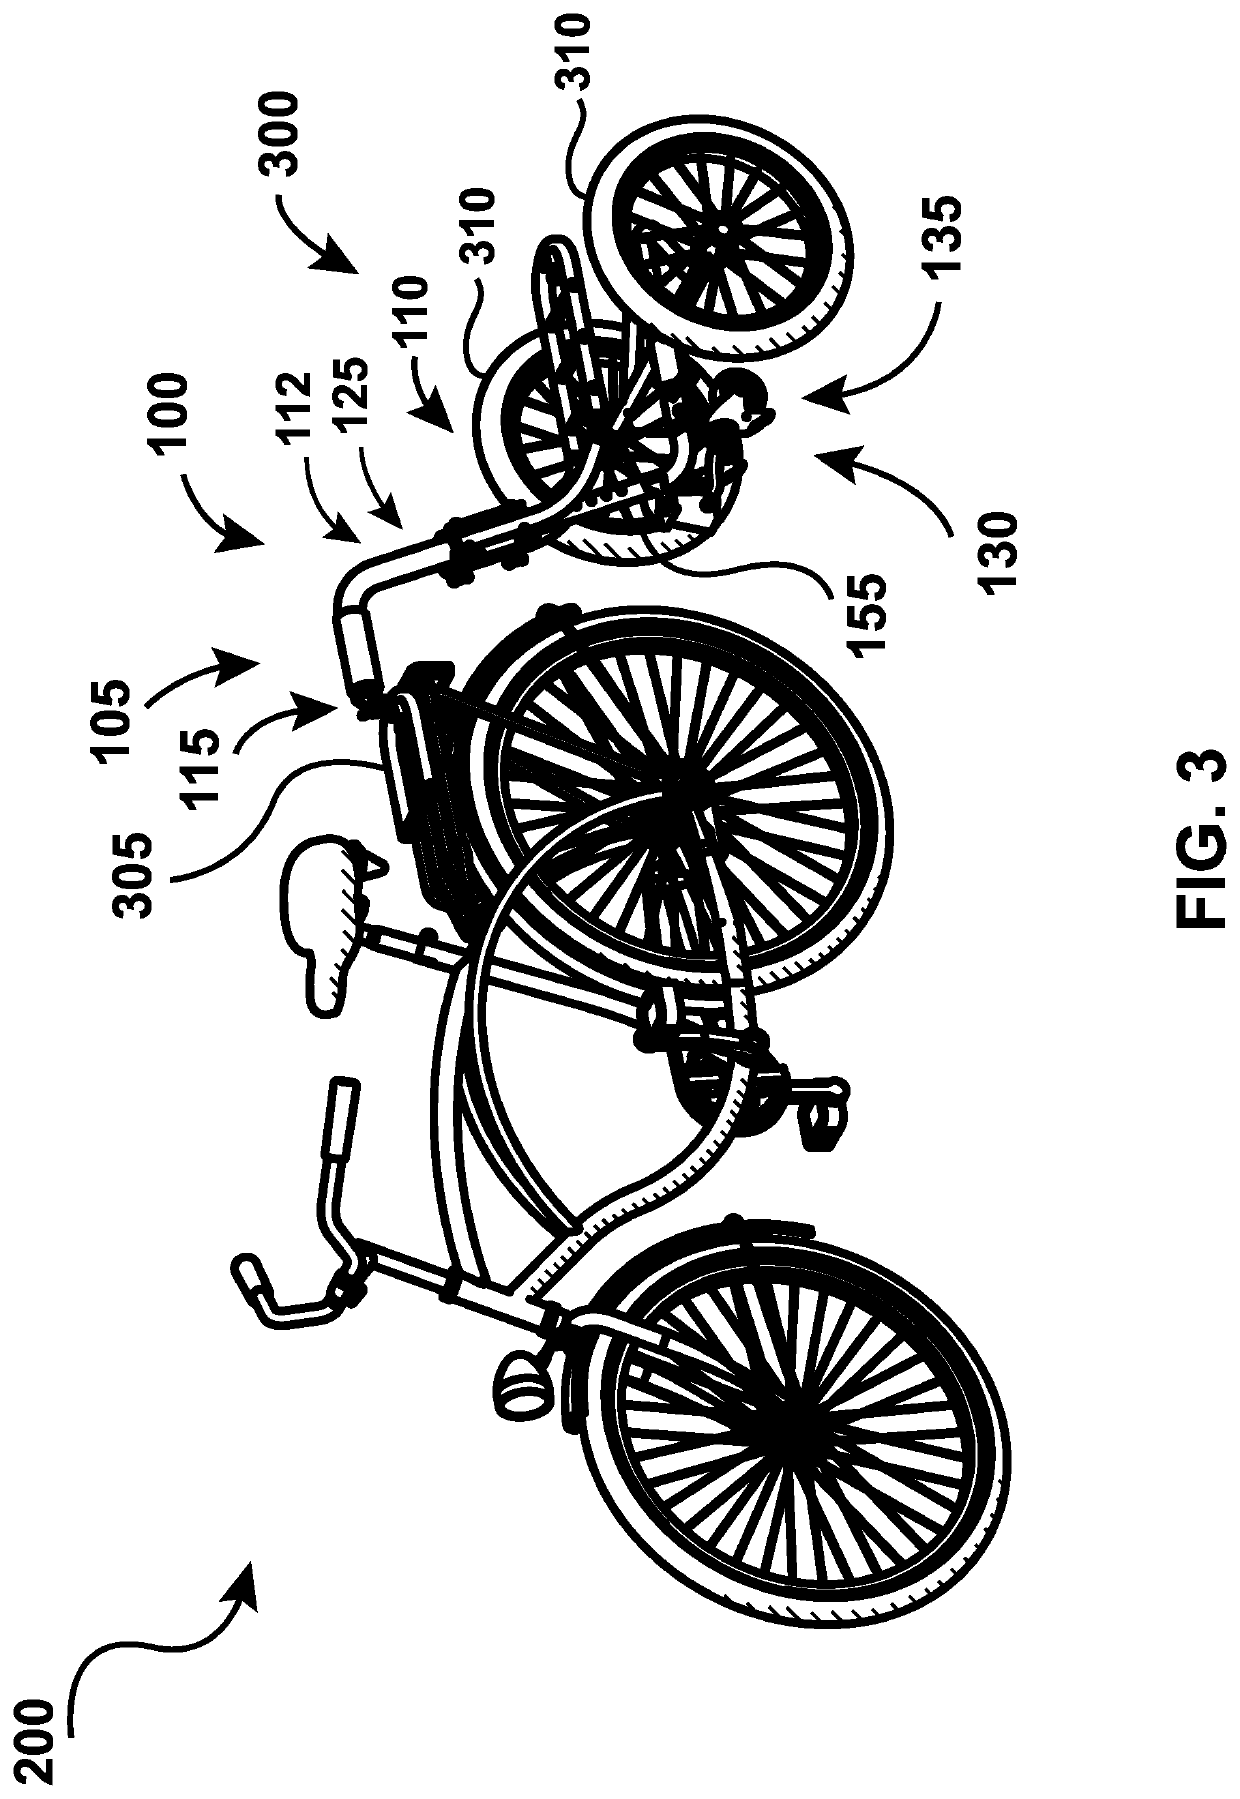 Tow arm assembly to detachably attach a trailer to a bicycle